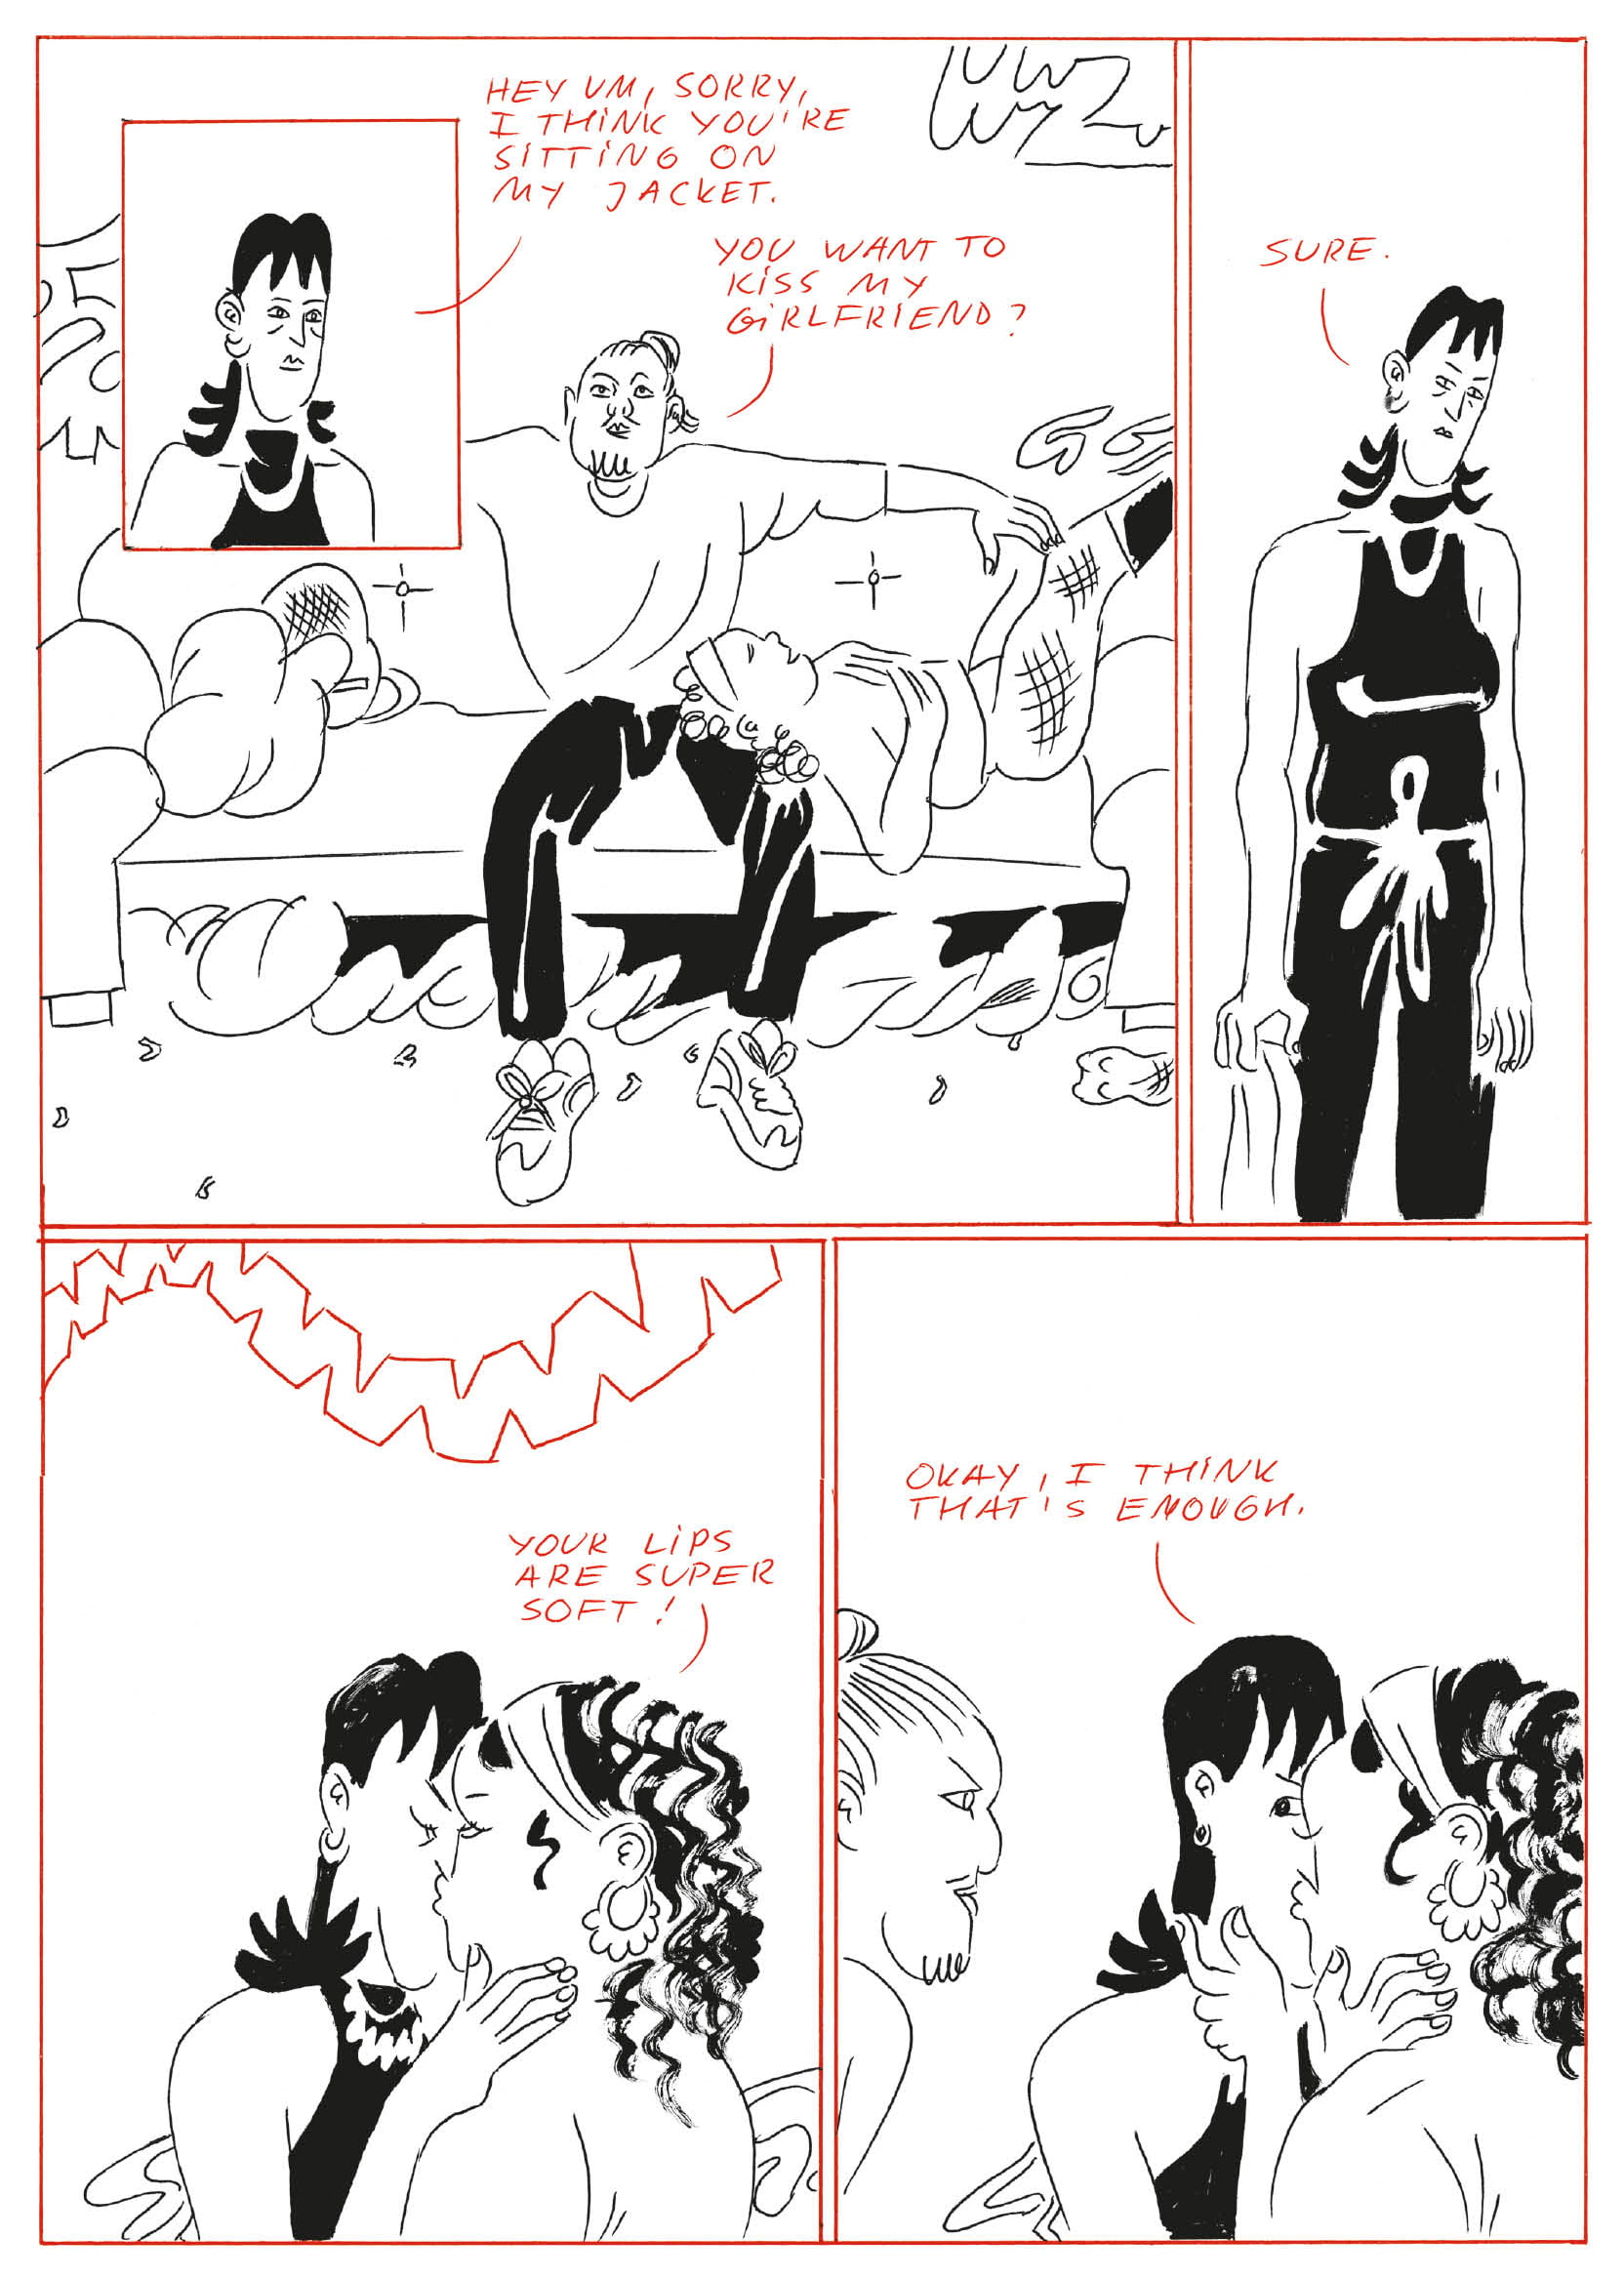 Four comic panels depicting a scene at the club; a dude asks Ingken if they want to kiss his girlfriend, they are interested, until they notice he’s staring at the two of them too intently.